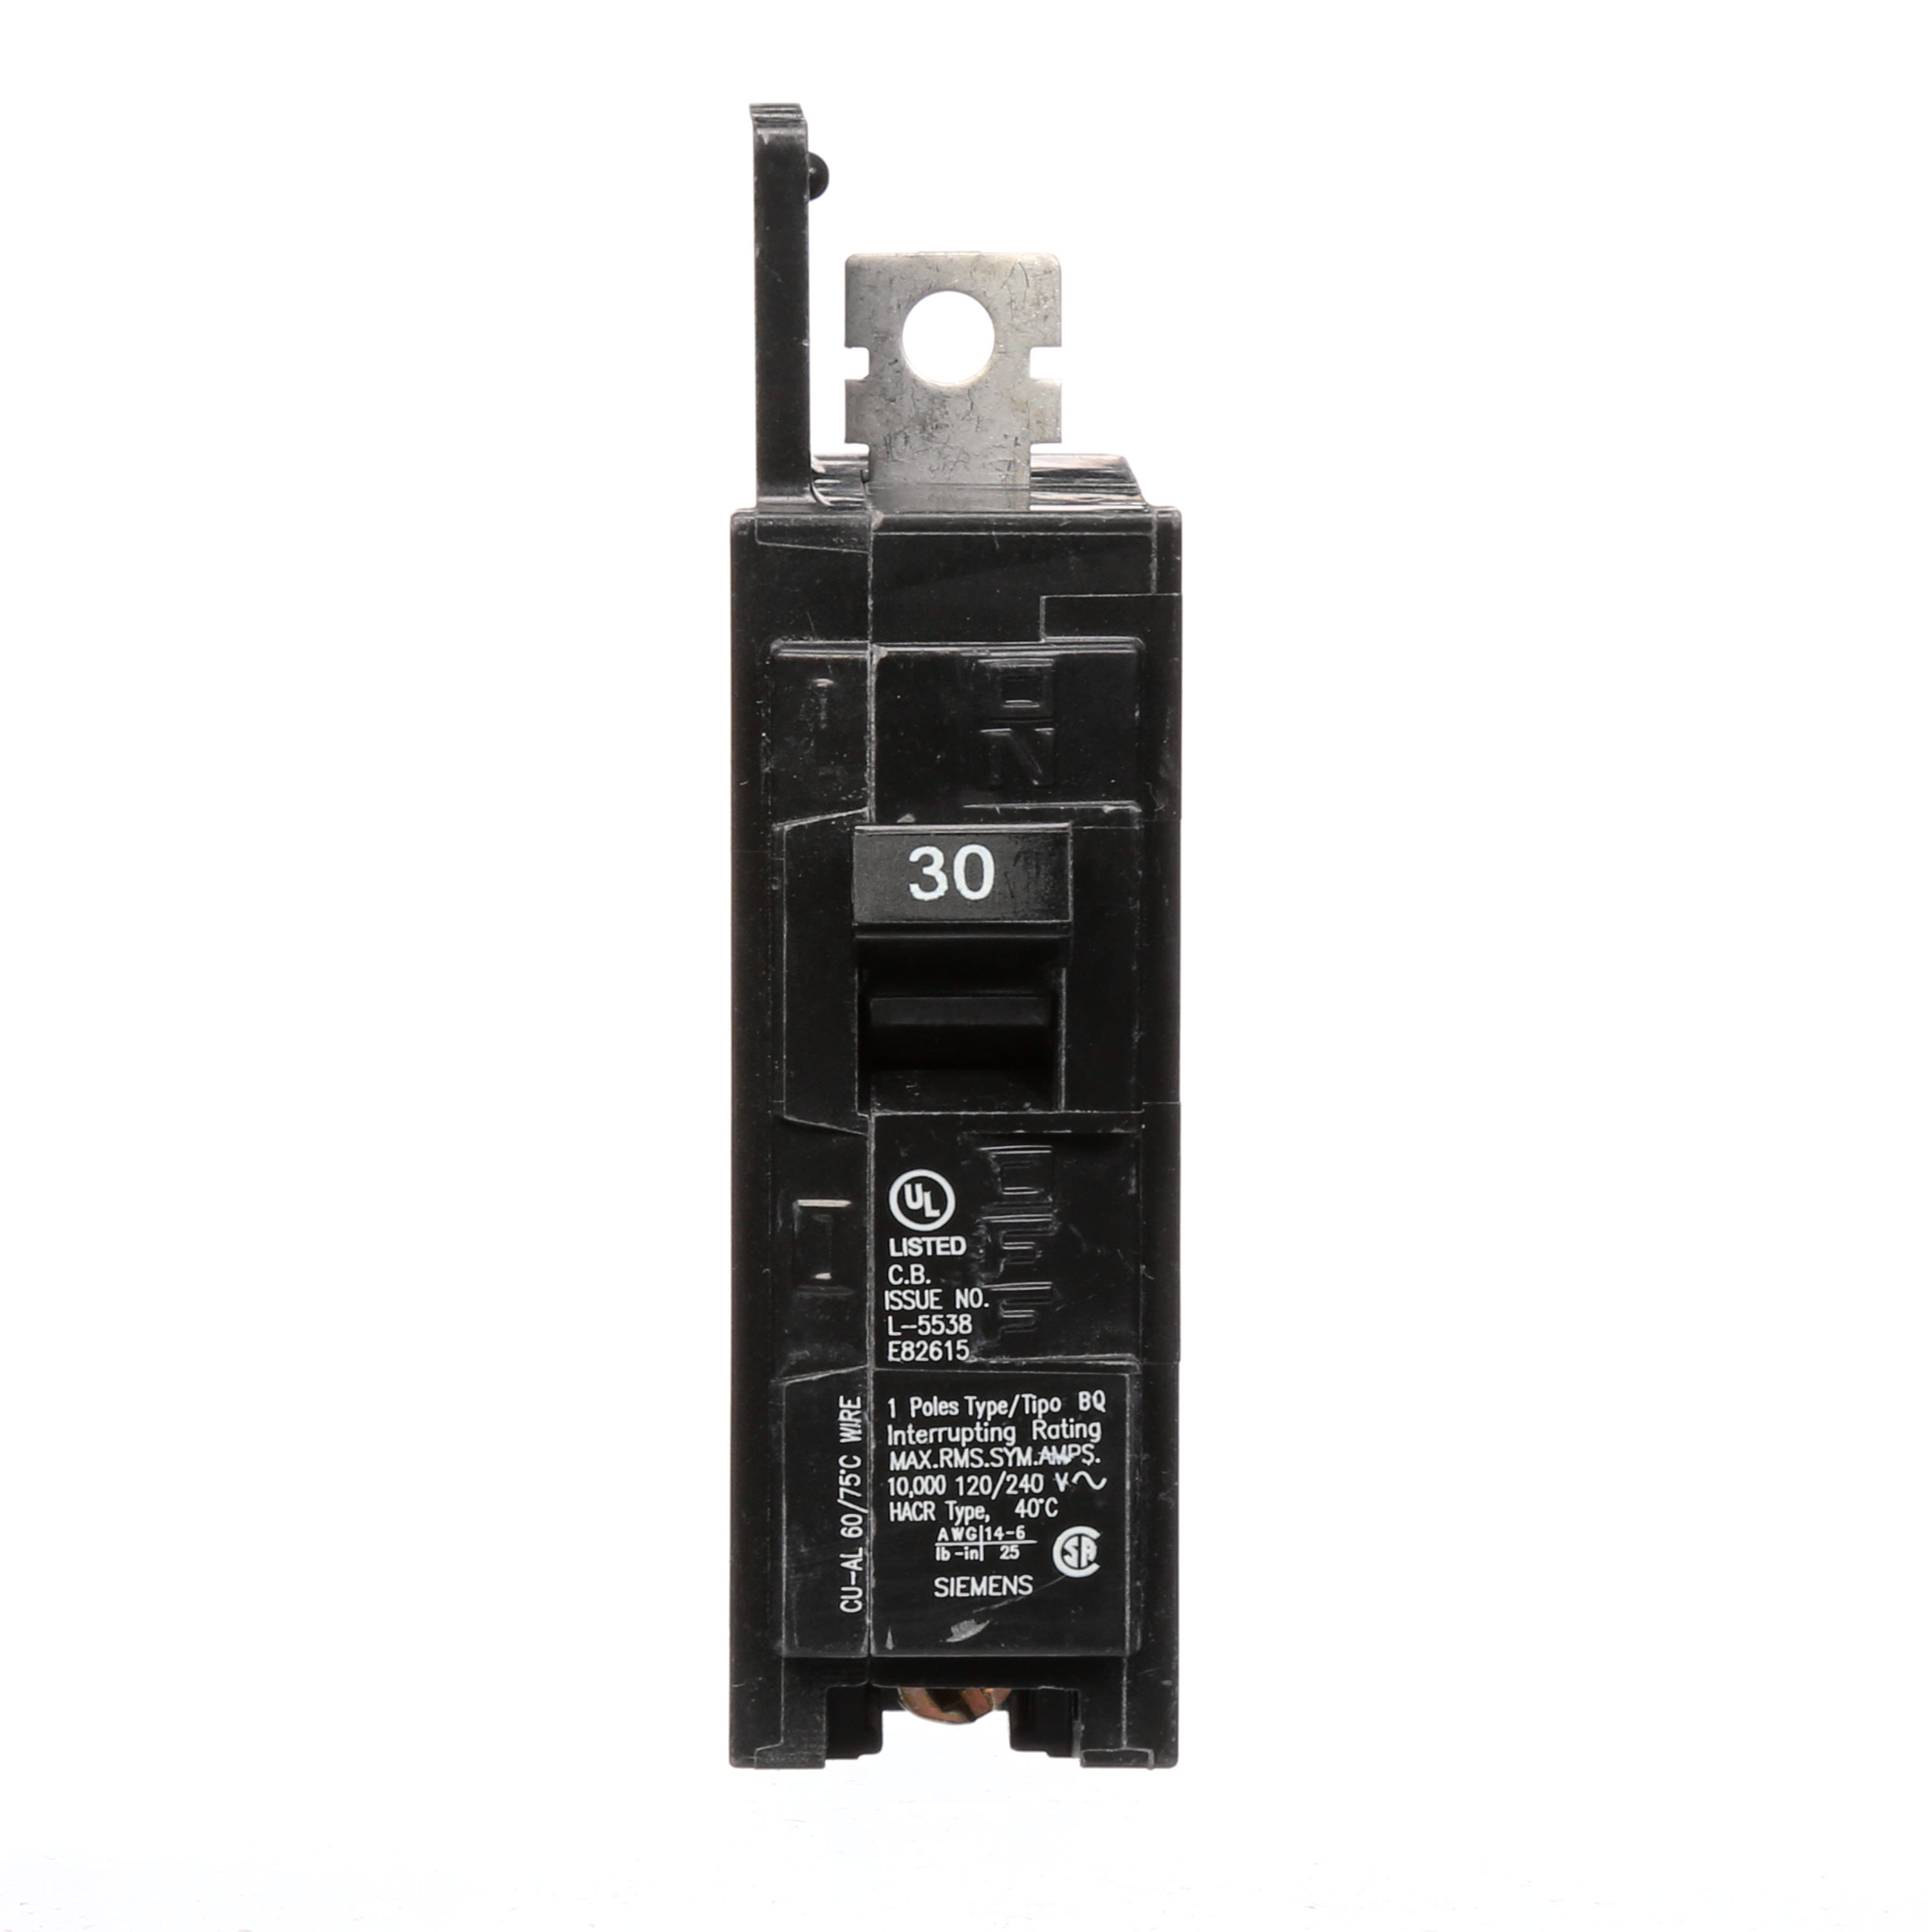 Siemens Low Voltage Molded Case Circuit Breakers General Purpose MCCBs are Circuit Protection Molded Case Circuit Breakers. 1-Pole circuit breaker type BQ. Rated 120V (030A) (AIR 10 kA). Special features Load side lugs are included.